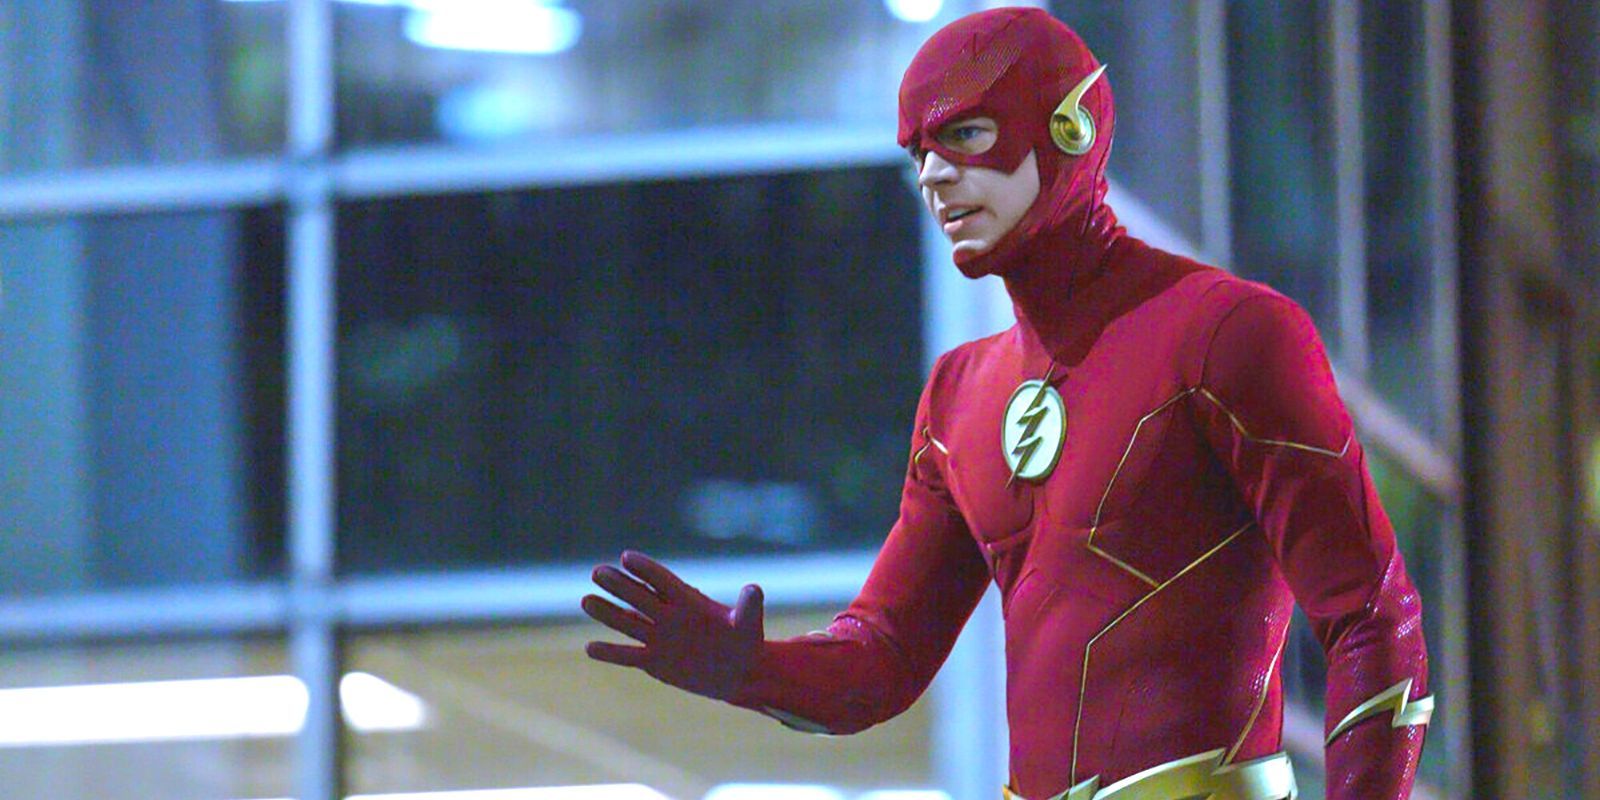 Grant Gustin Celebrates 'Flash Missing' Day With Throwback Photo